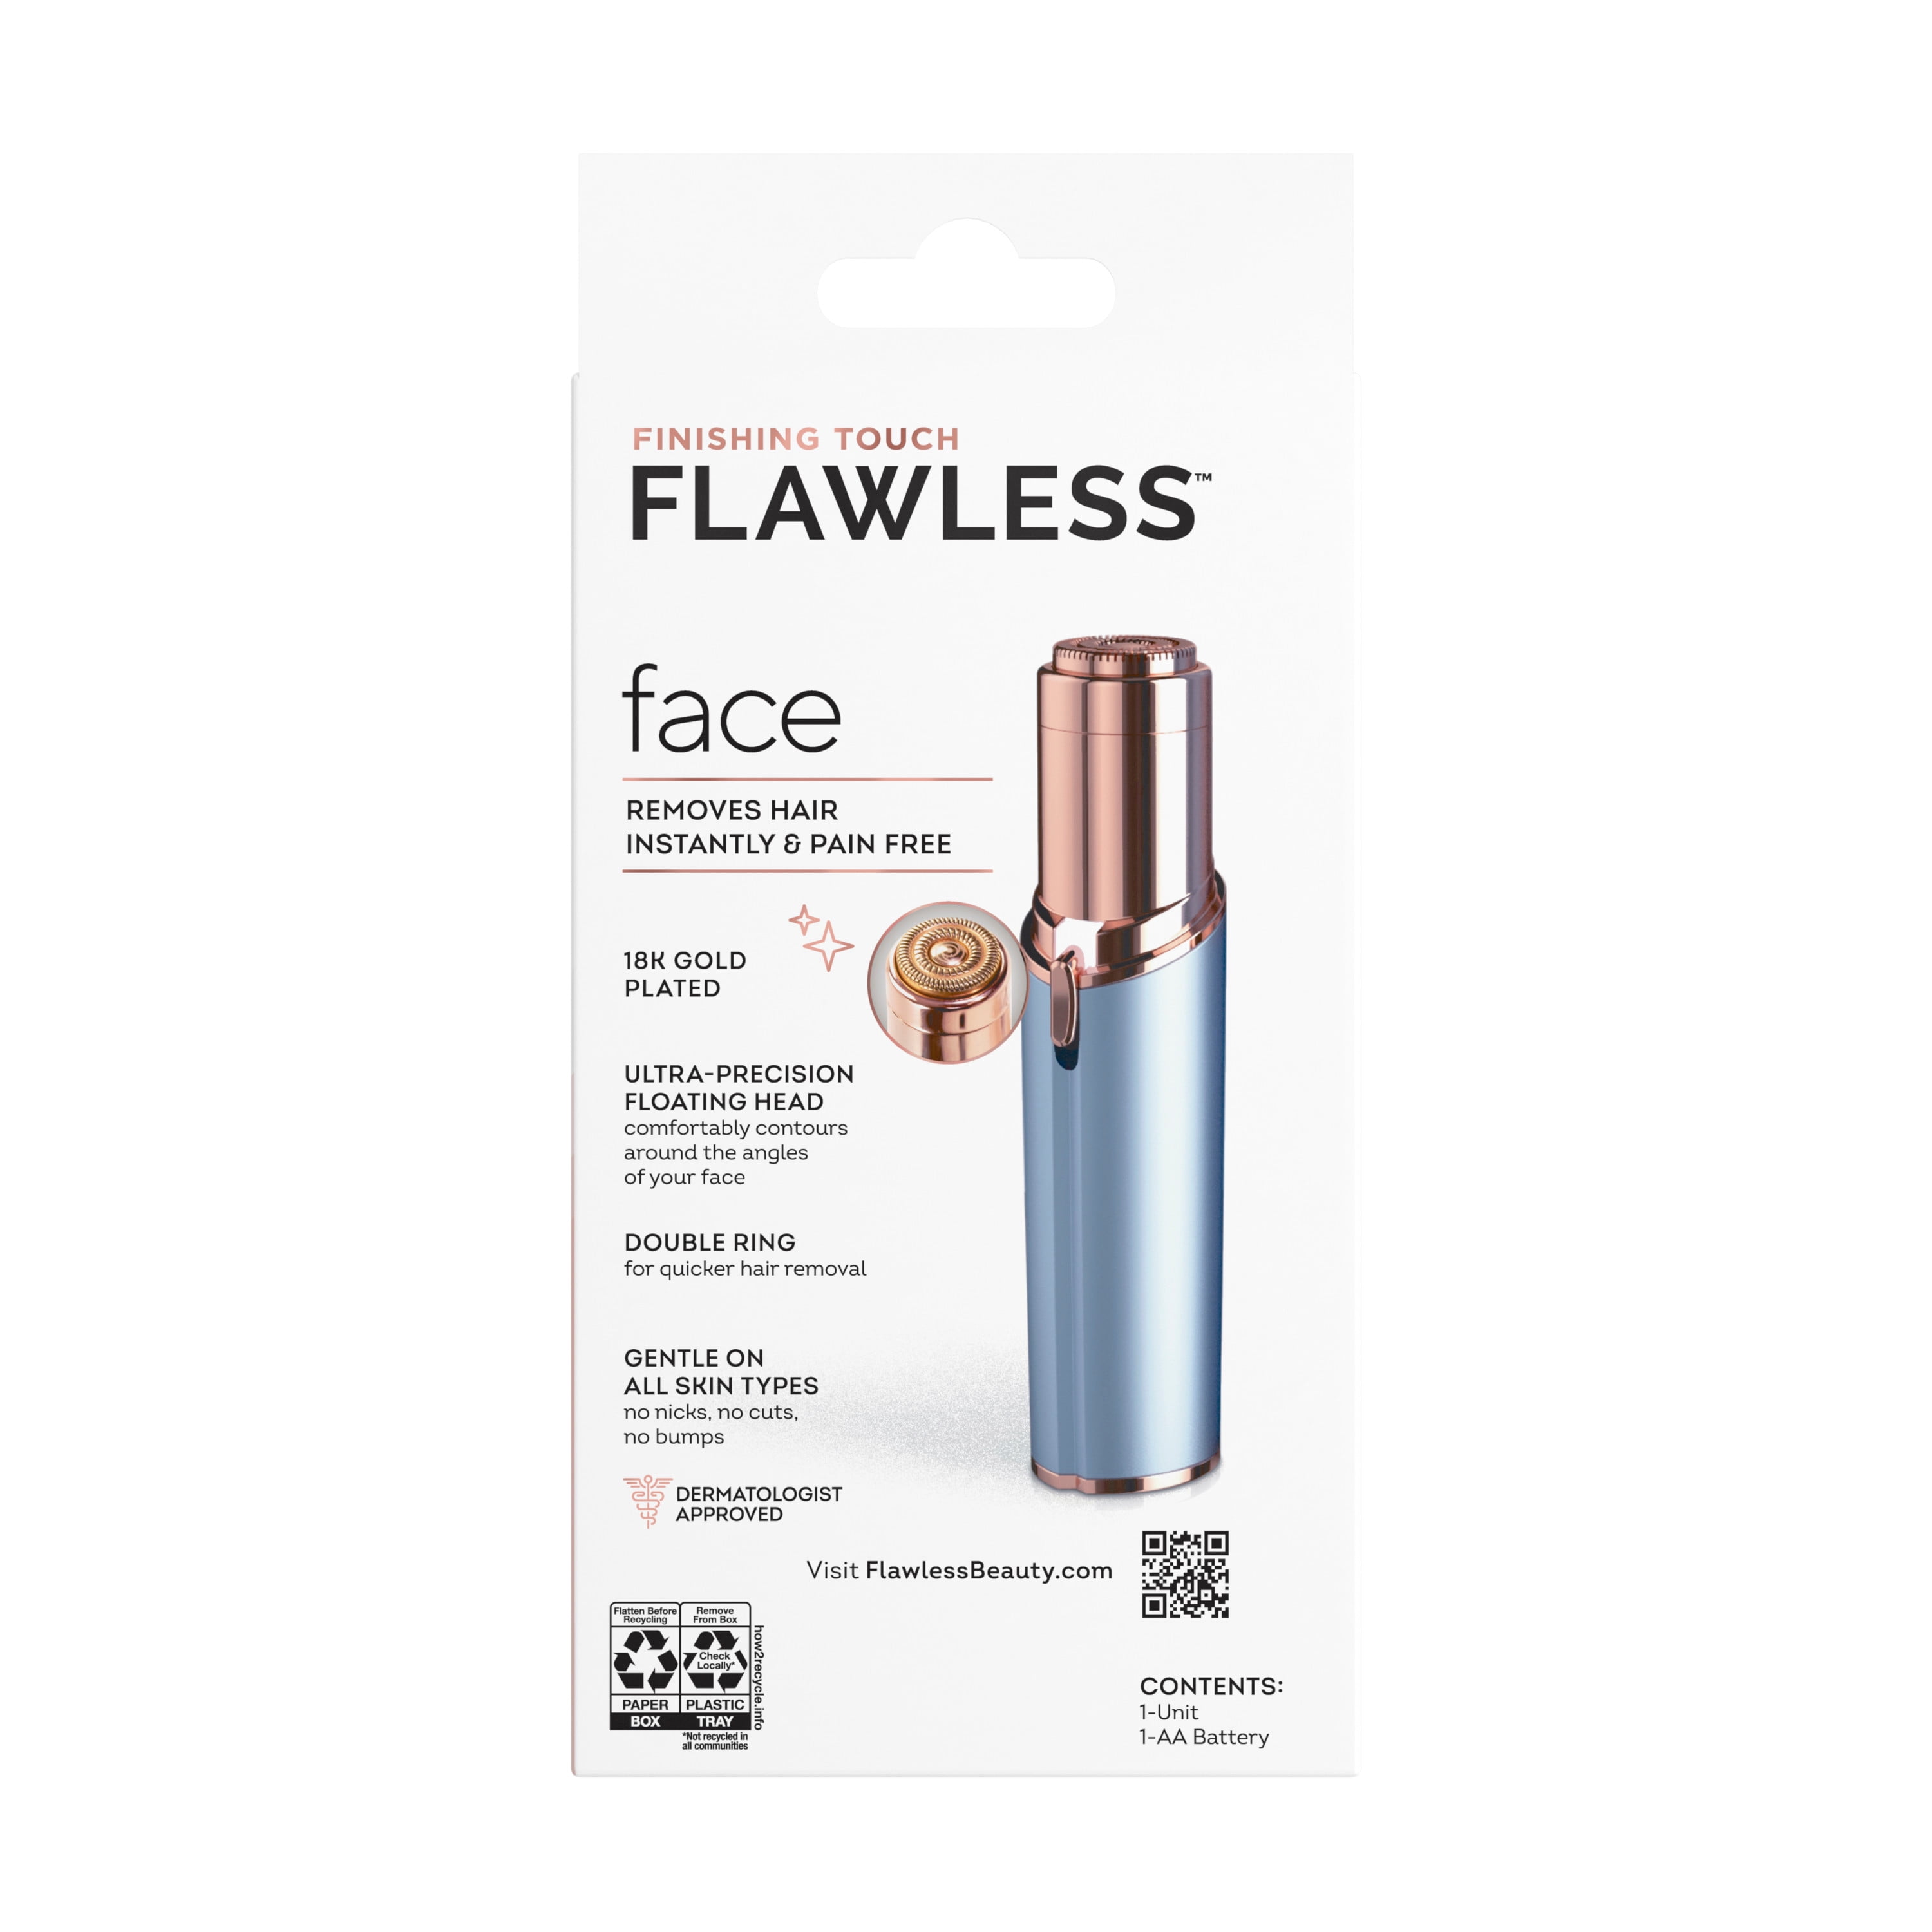 Finishing Touch Flawless Hair Remover, Assorted Colors - 1 ct